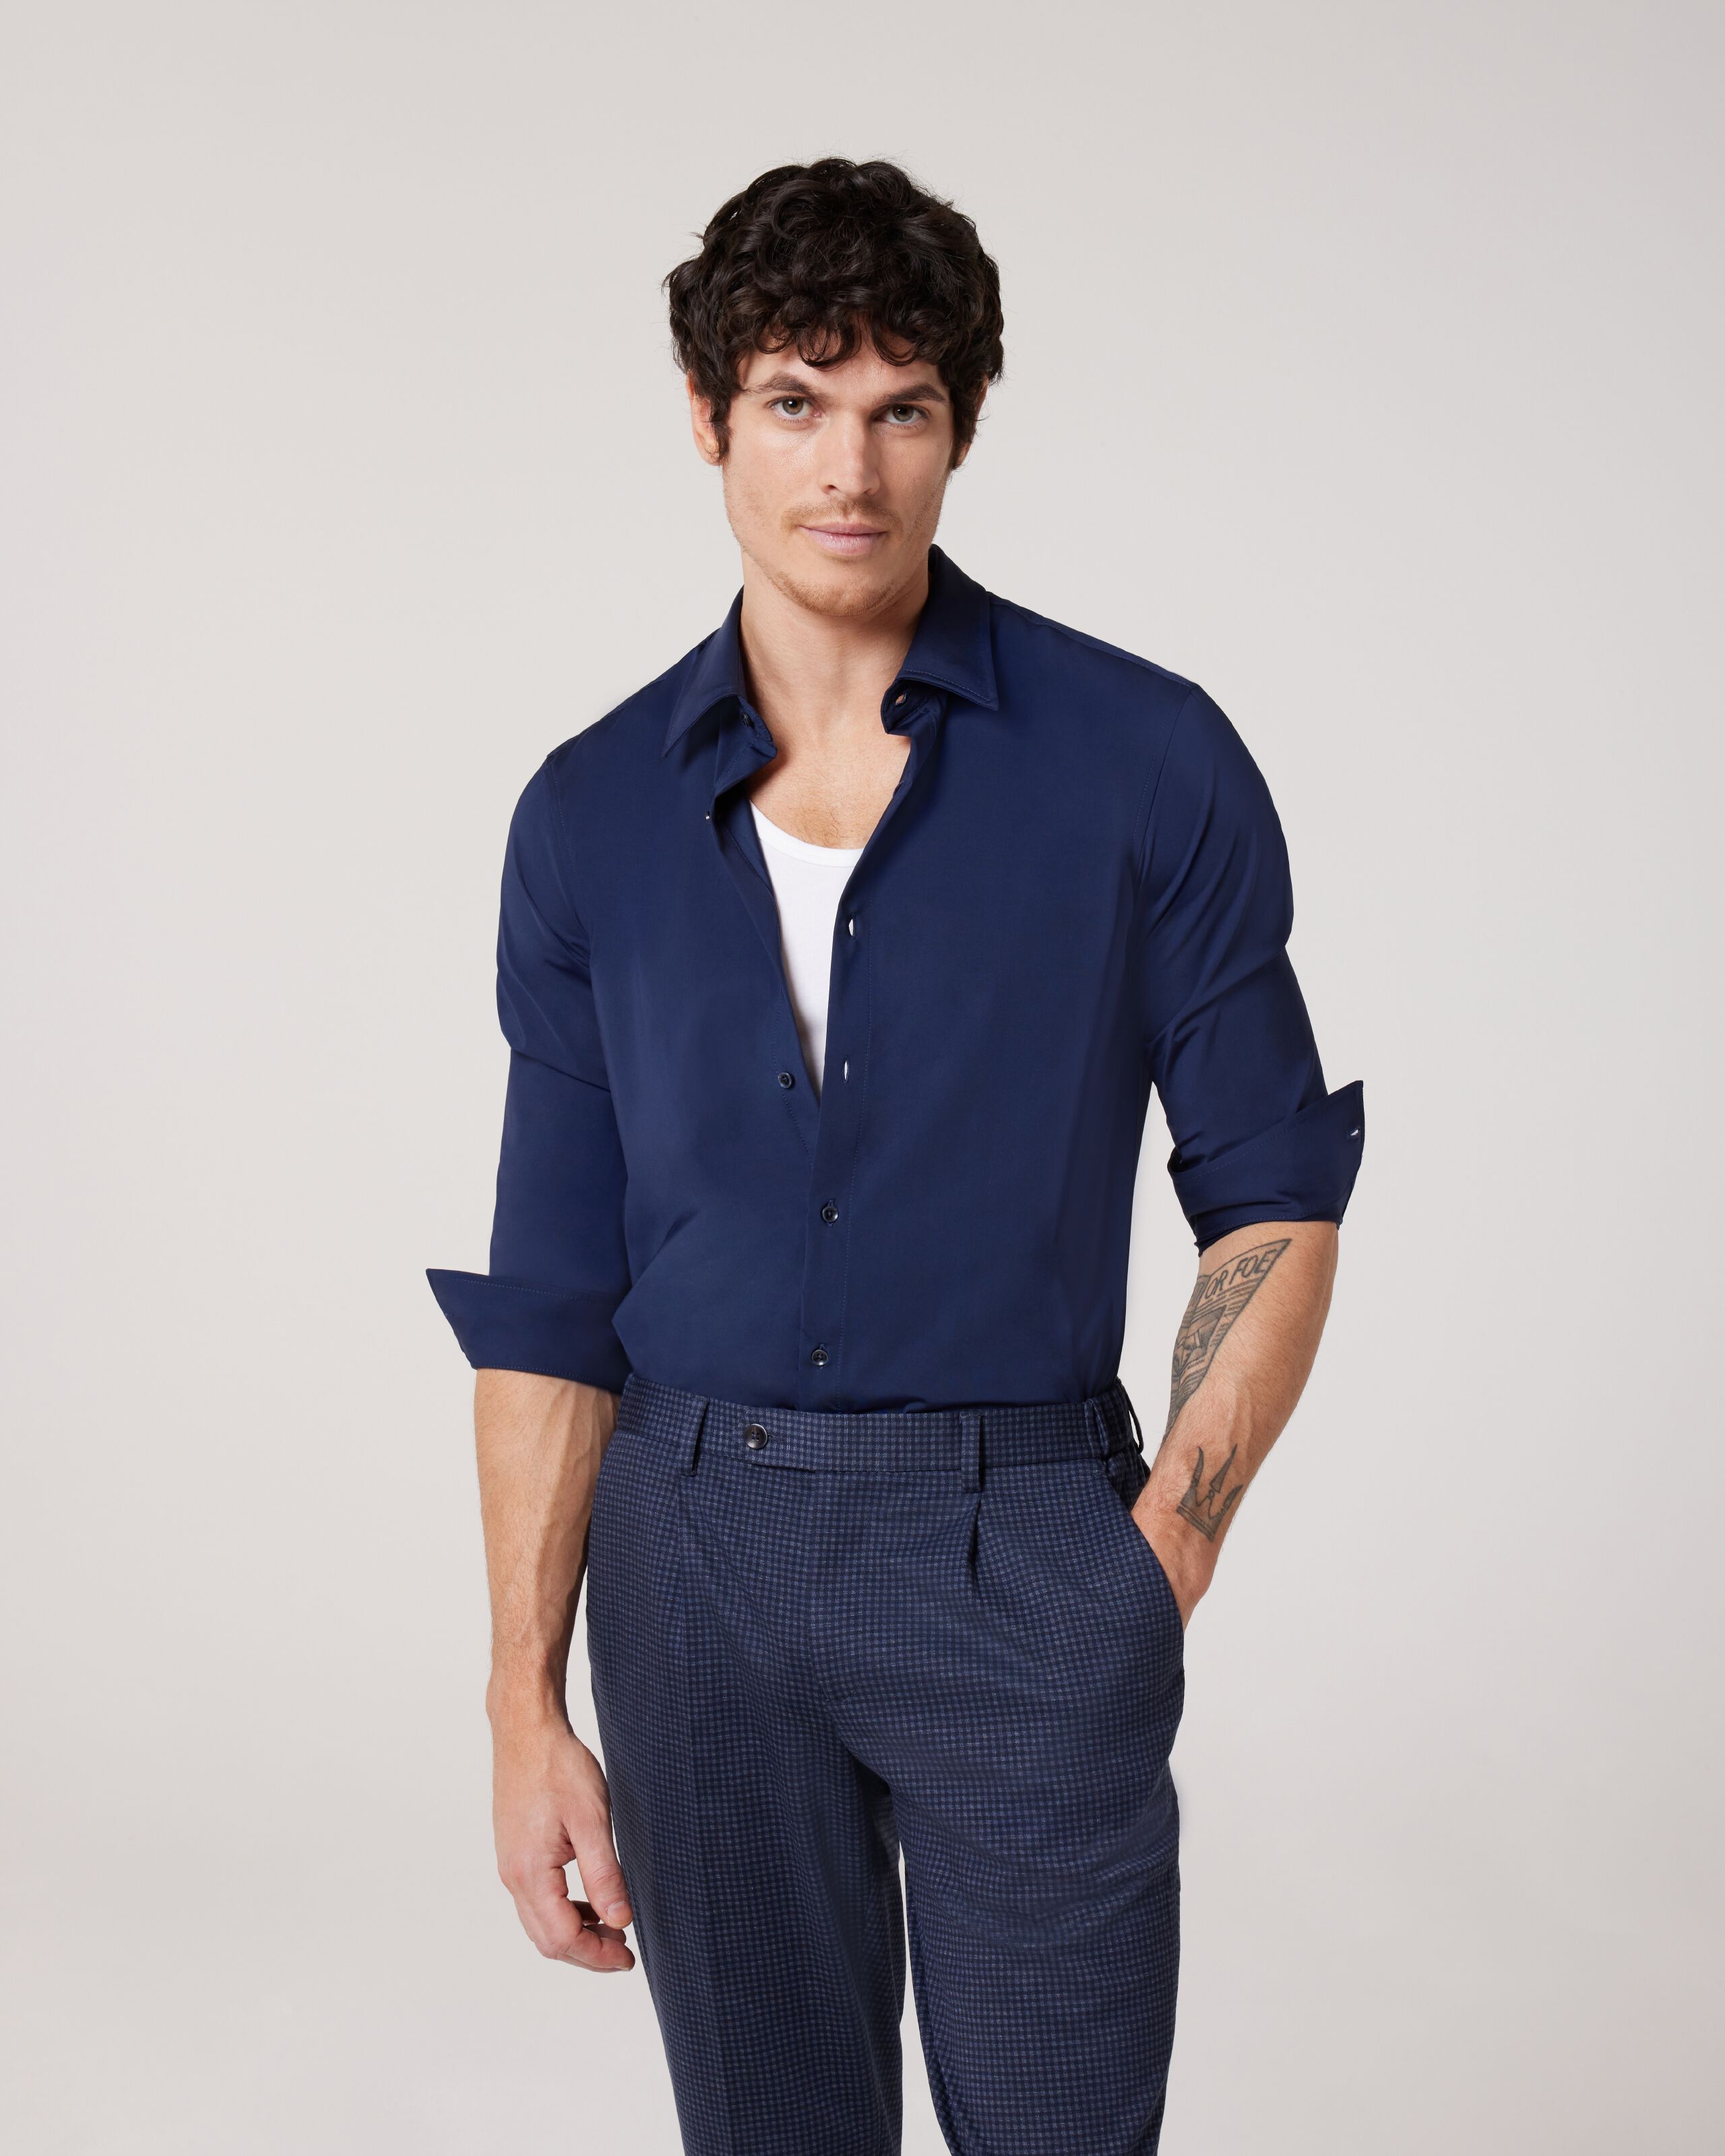 Buy unstitched sky blue shirt and navy blue dark pant fabric at Amazon.in